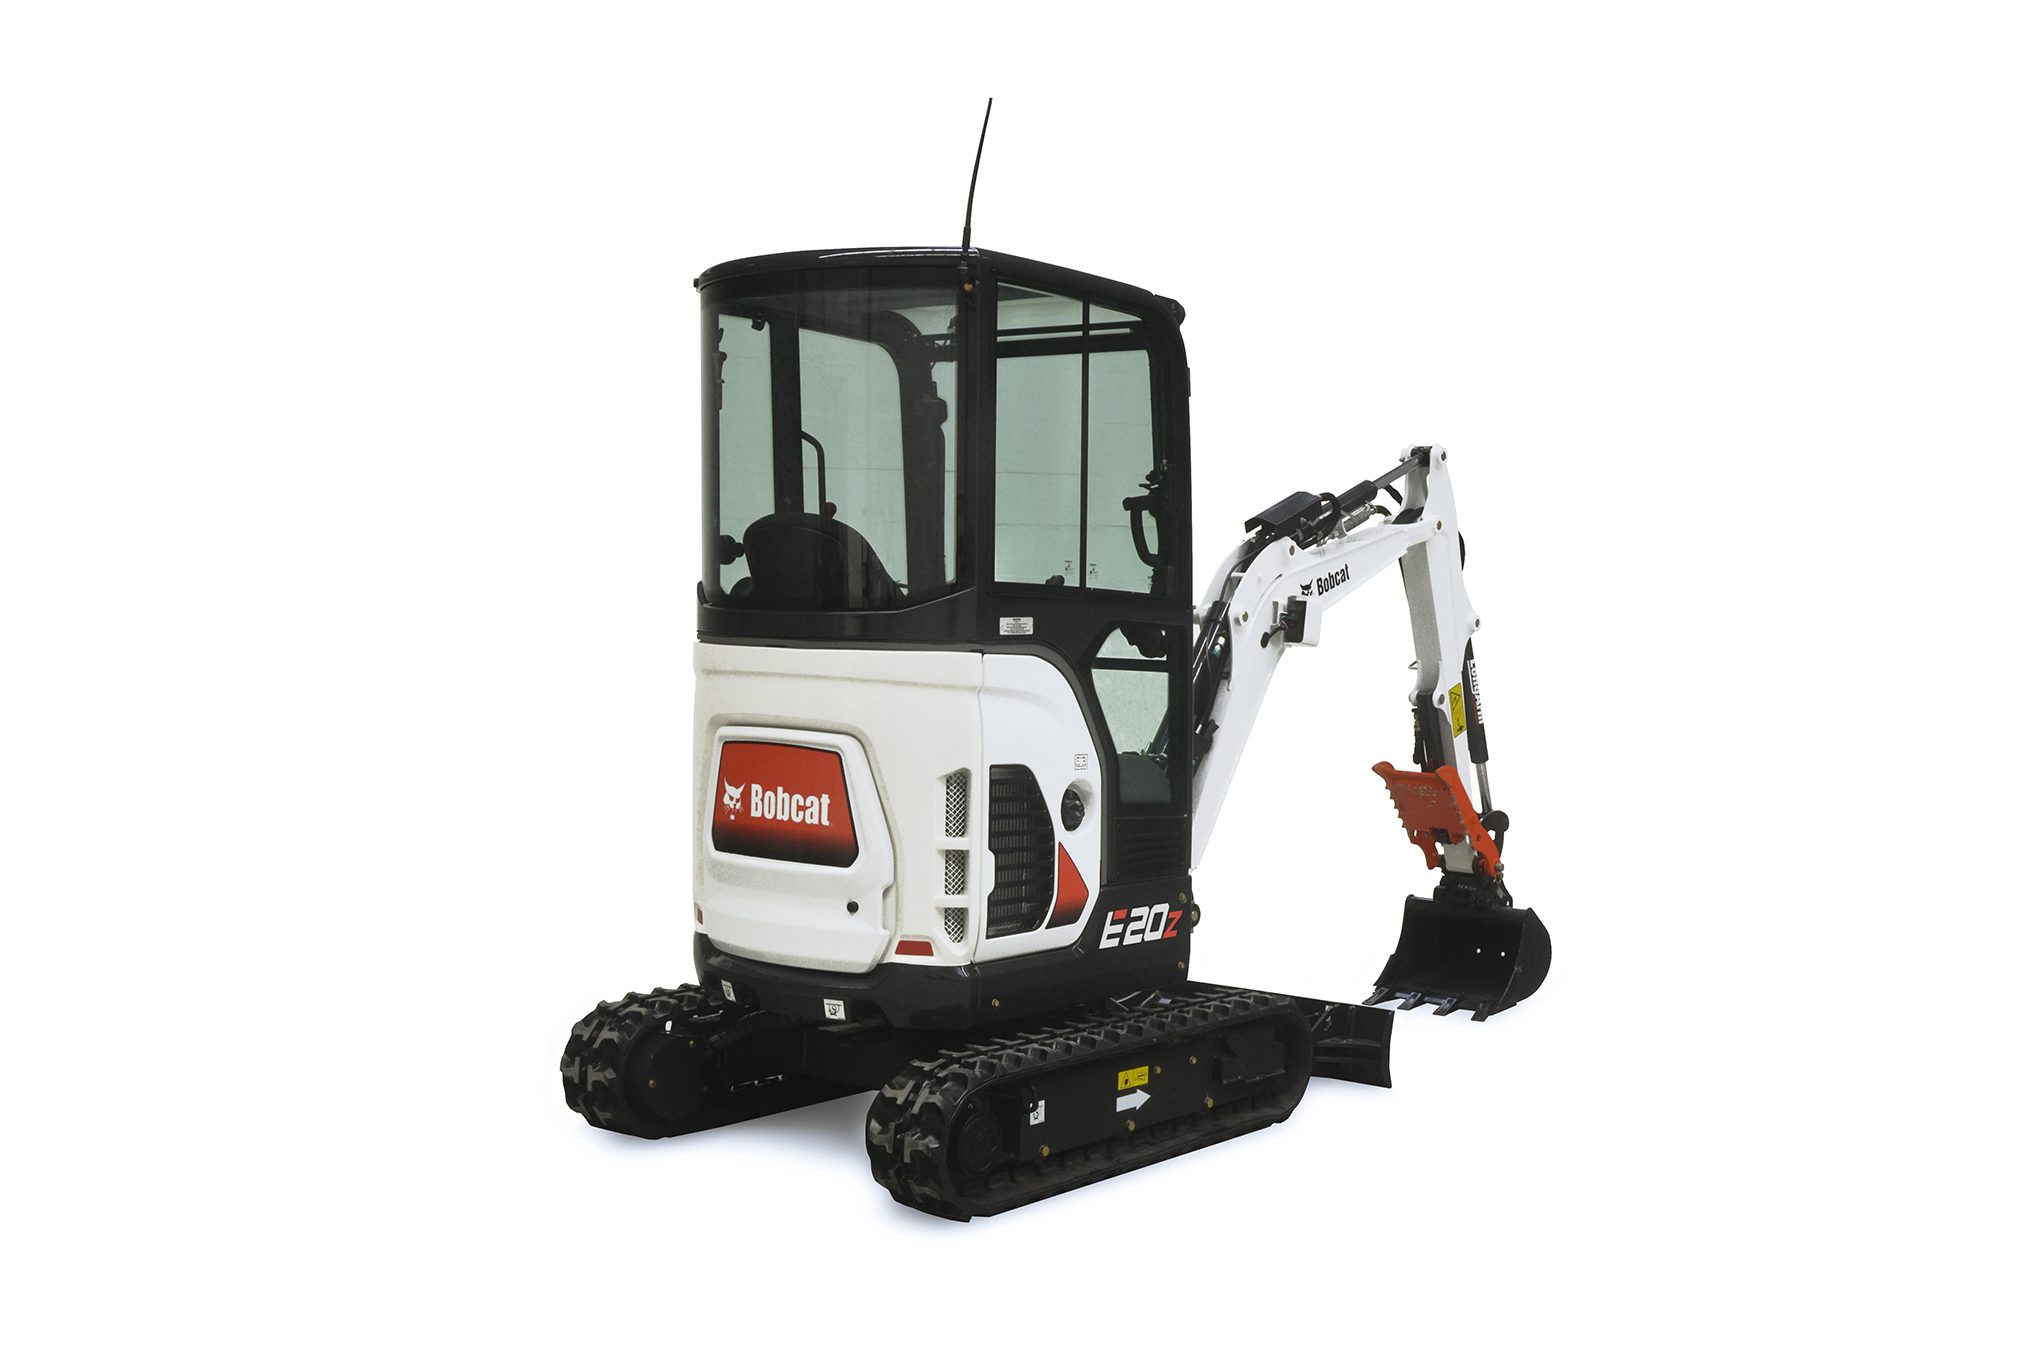 Browse Specs and more for the Bobcat E20 Compact Excavator - White Star Machinery